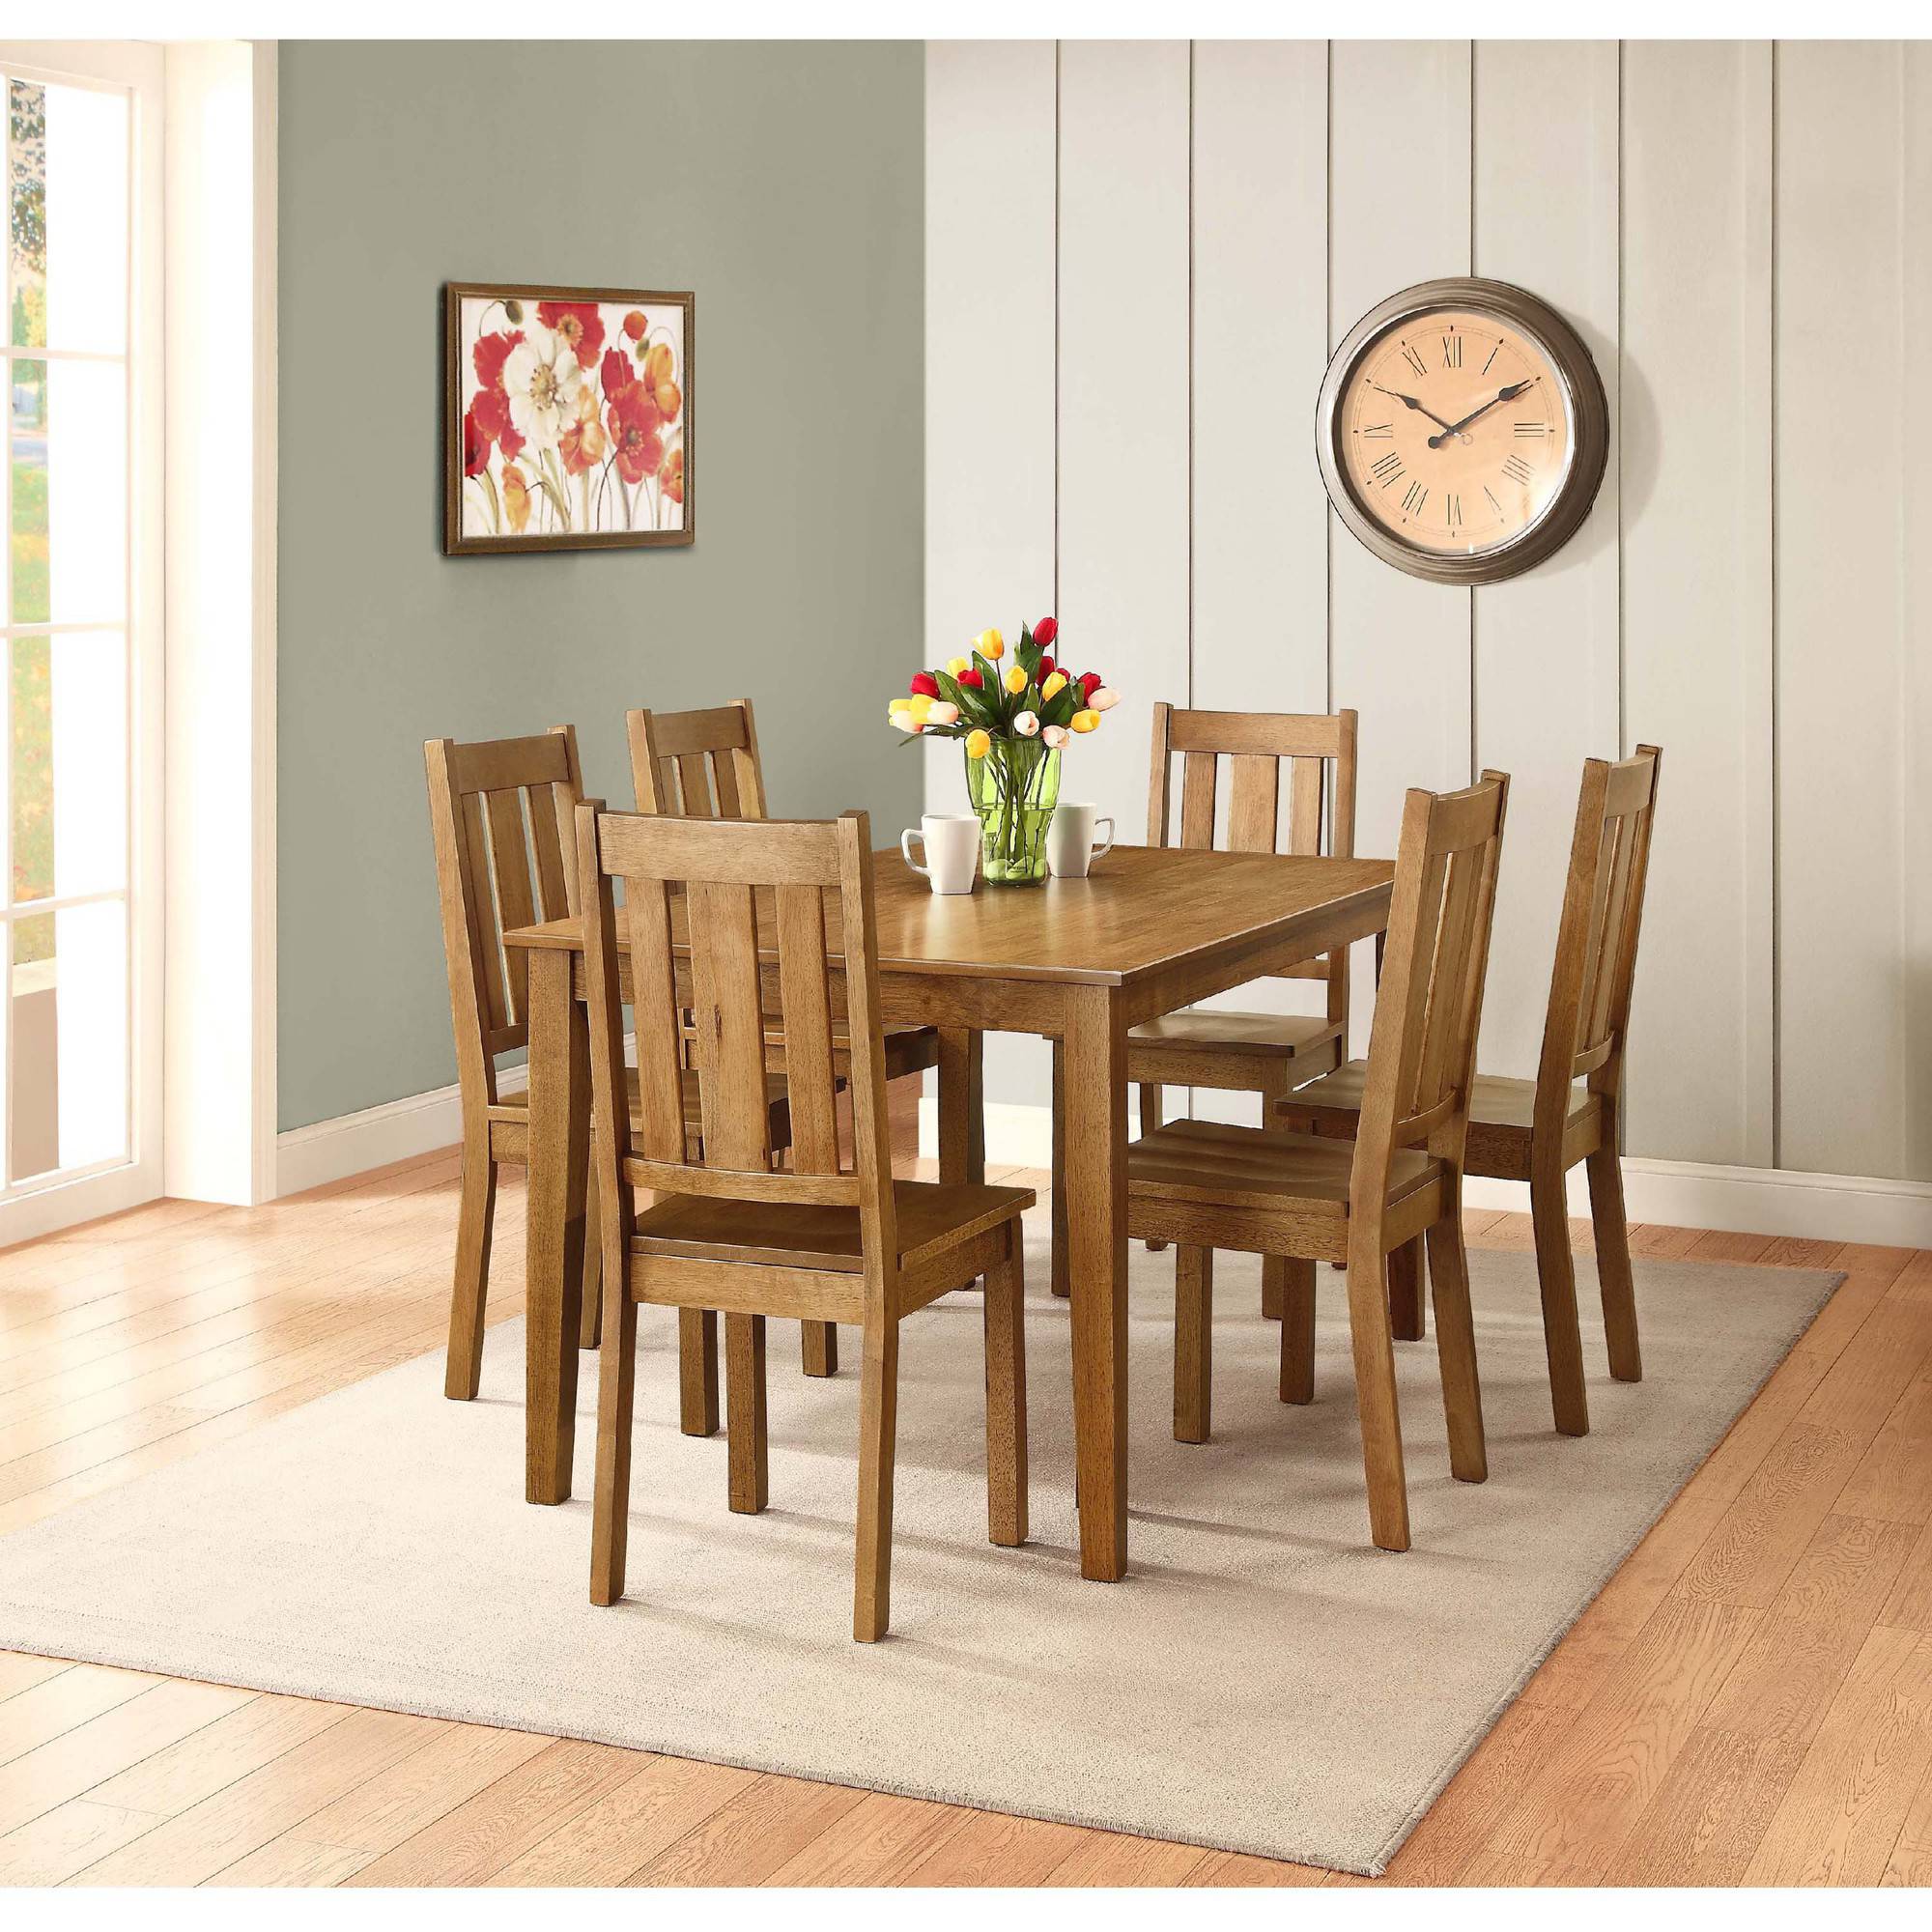 Better Homes and Gardens Bankston Dining Chair, Set of 2, Honey - image 5 of 6